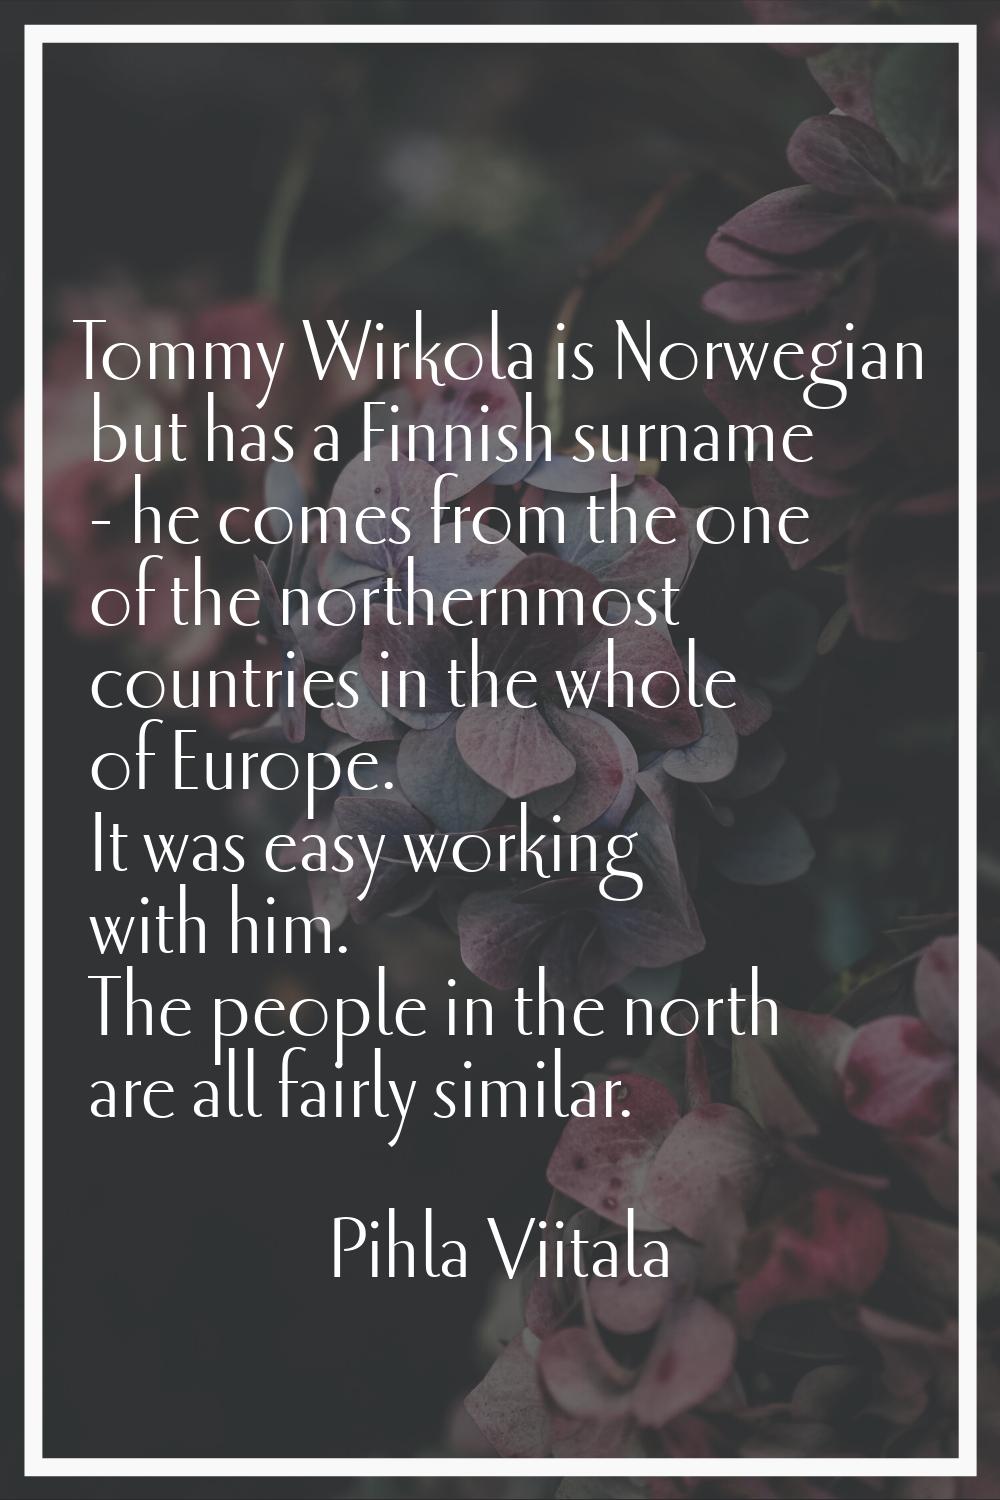 Tommy Wirkola is Norwegian but has a Finnish surname - he comes from the one of the northernmost co